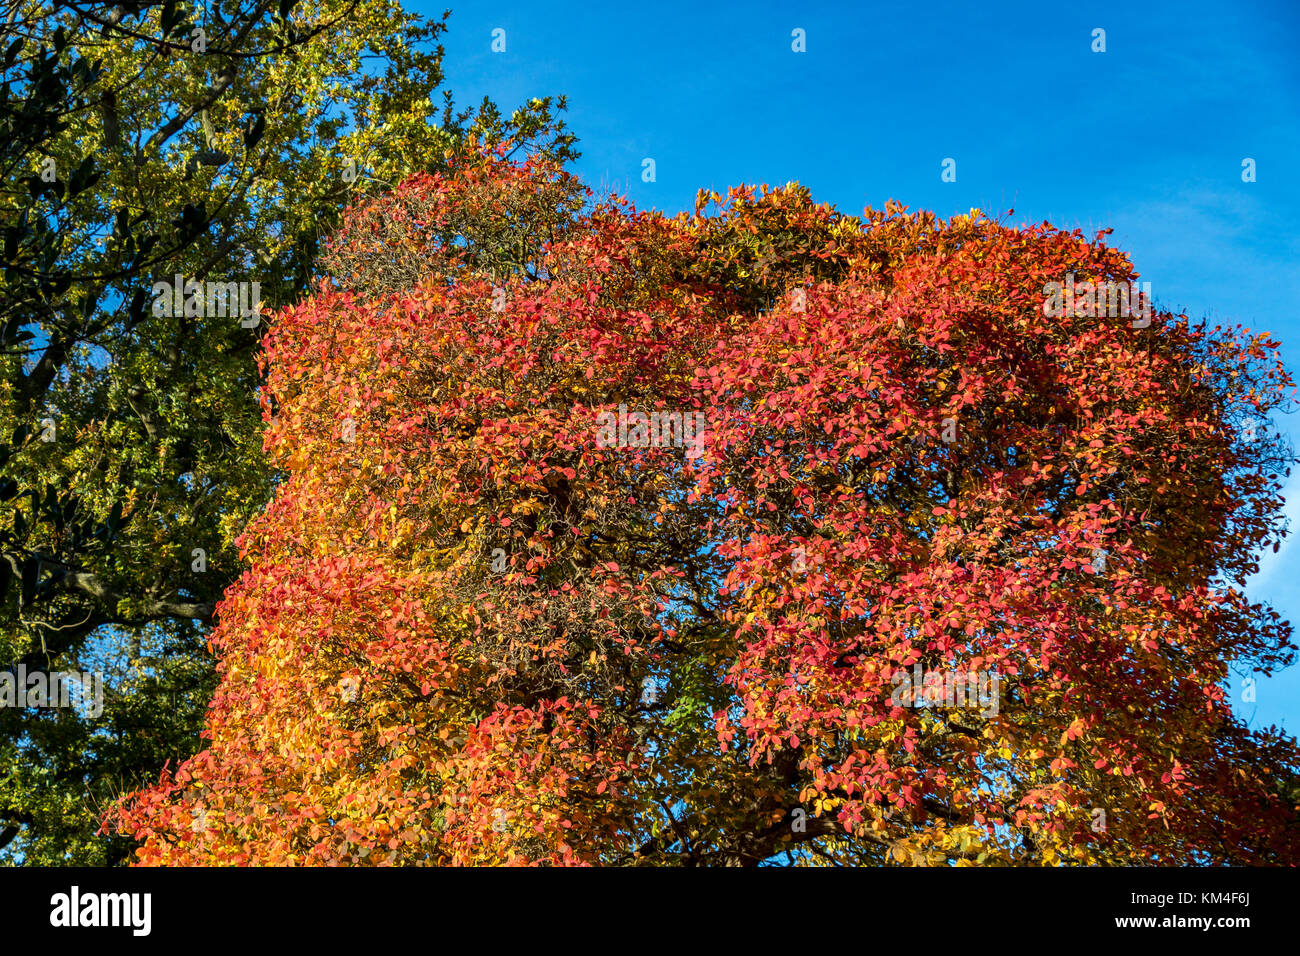 Tree in full Autumn colour with orange and red leaves Stock Photo